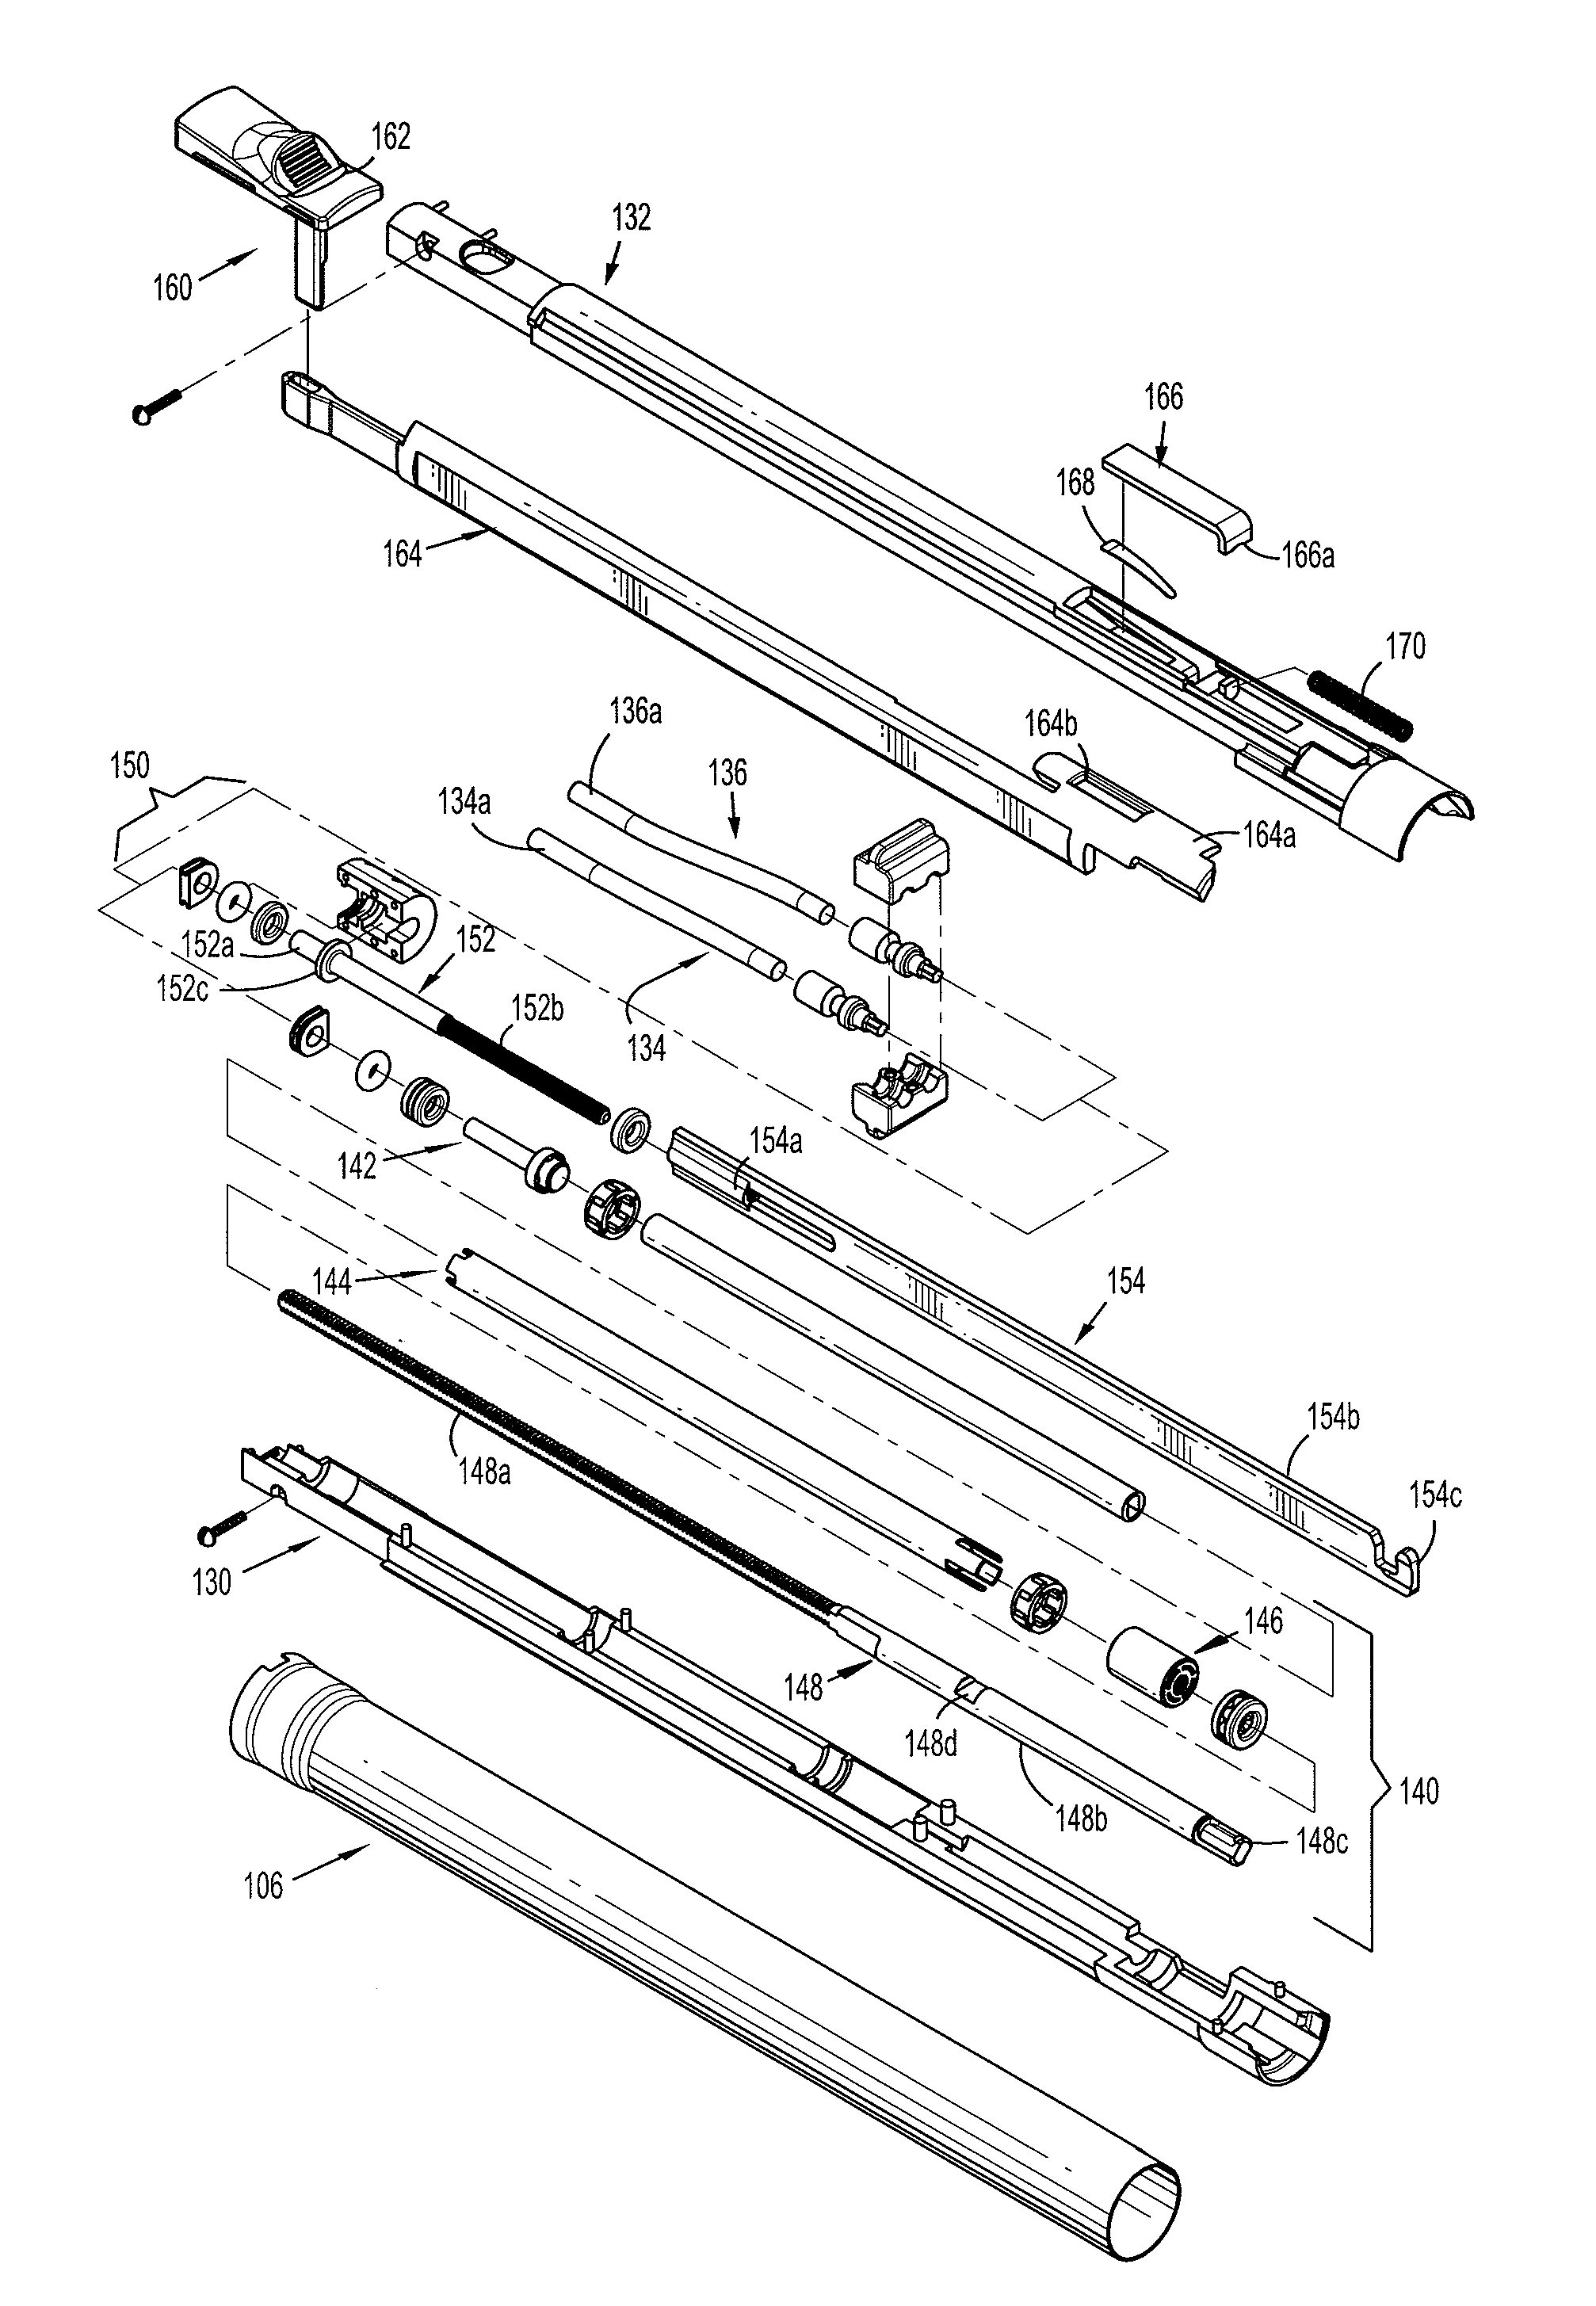 Adapters for use between surgical handle assembly and surgical end effector